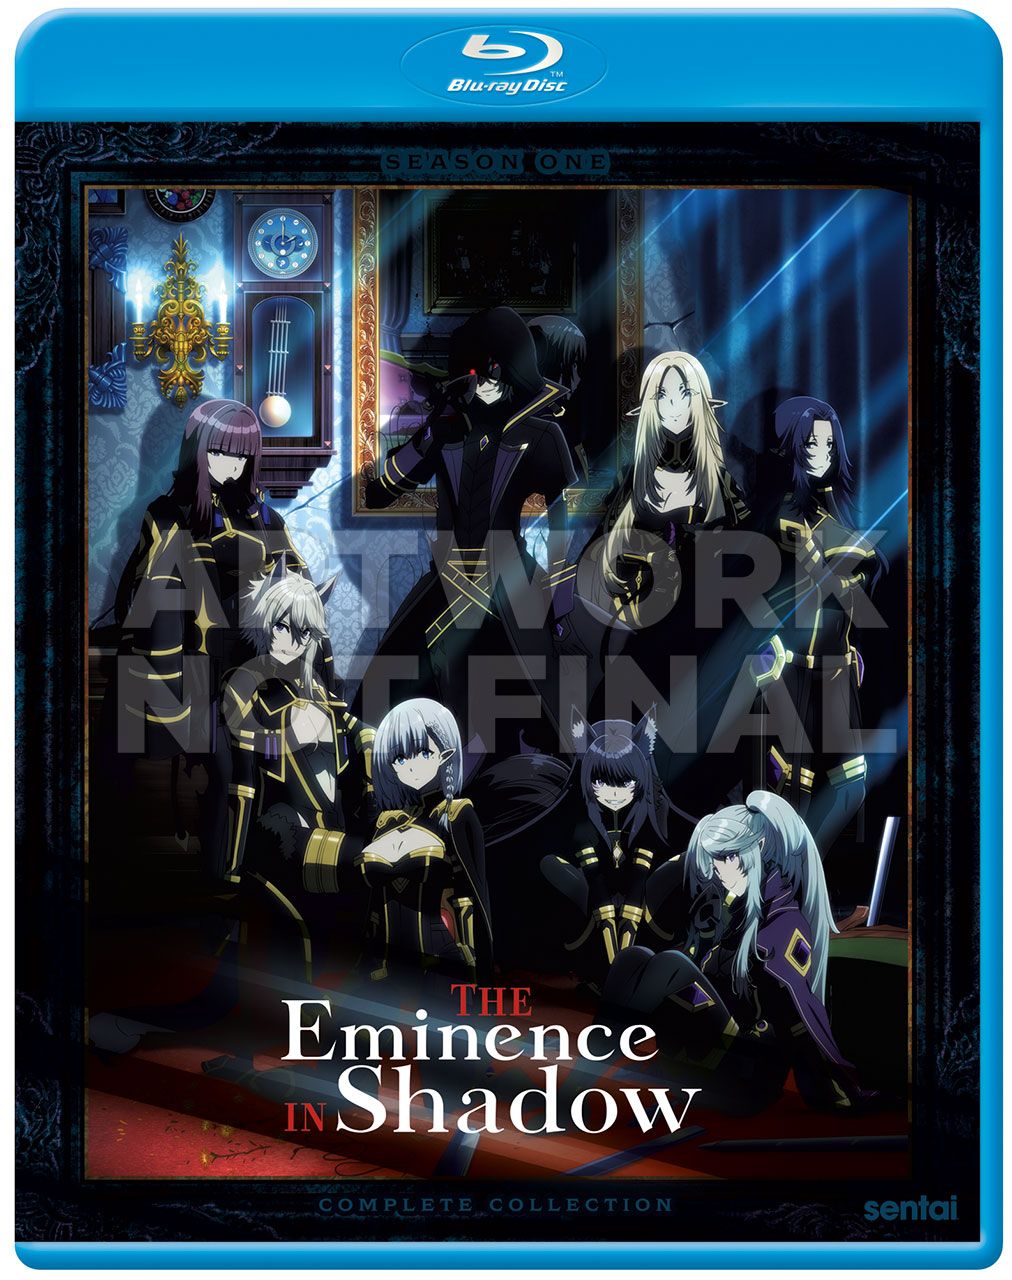  The Eminence In Shadow Season 1. Blu-ray cover art provided by Sentai.